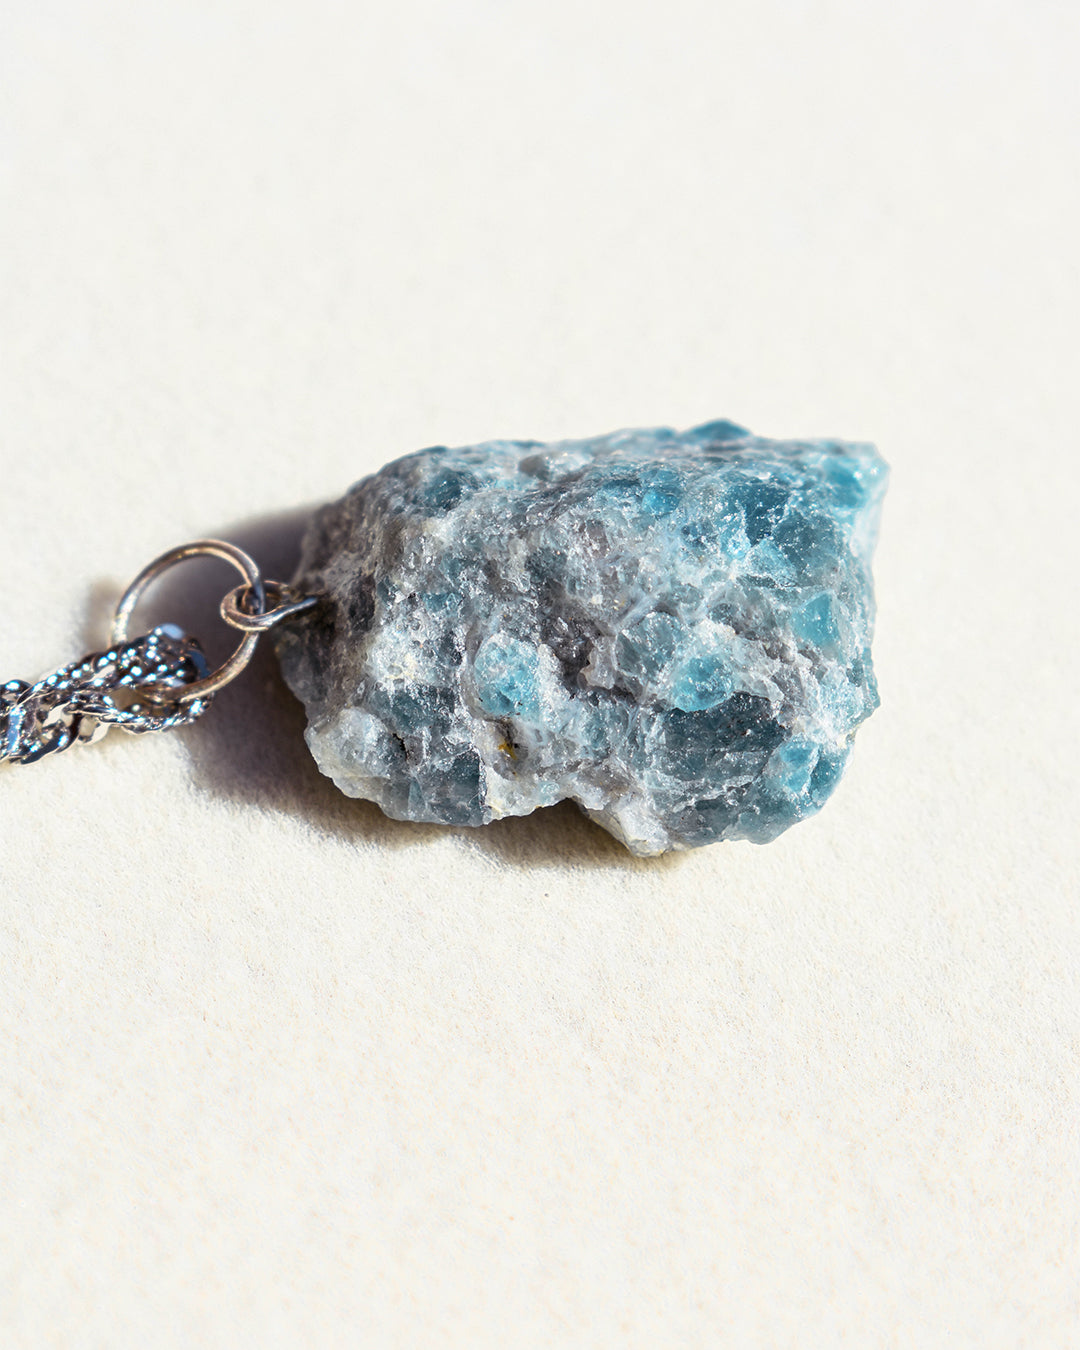 Stainless Steel chain with Apatite crystal pendant